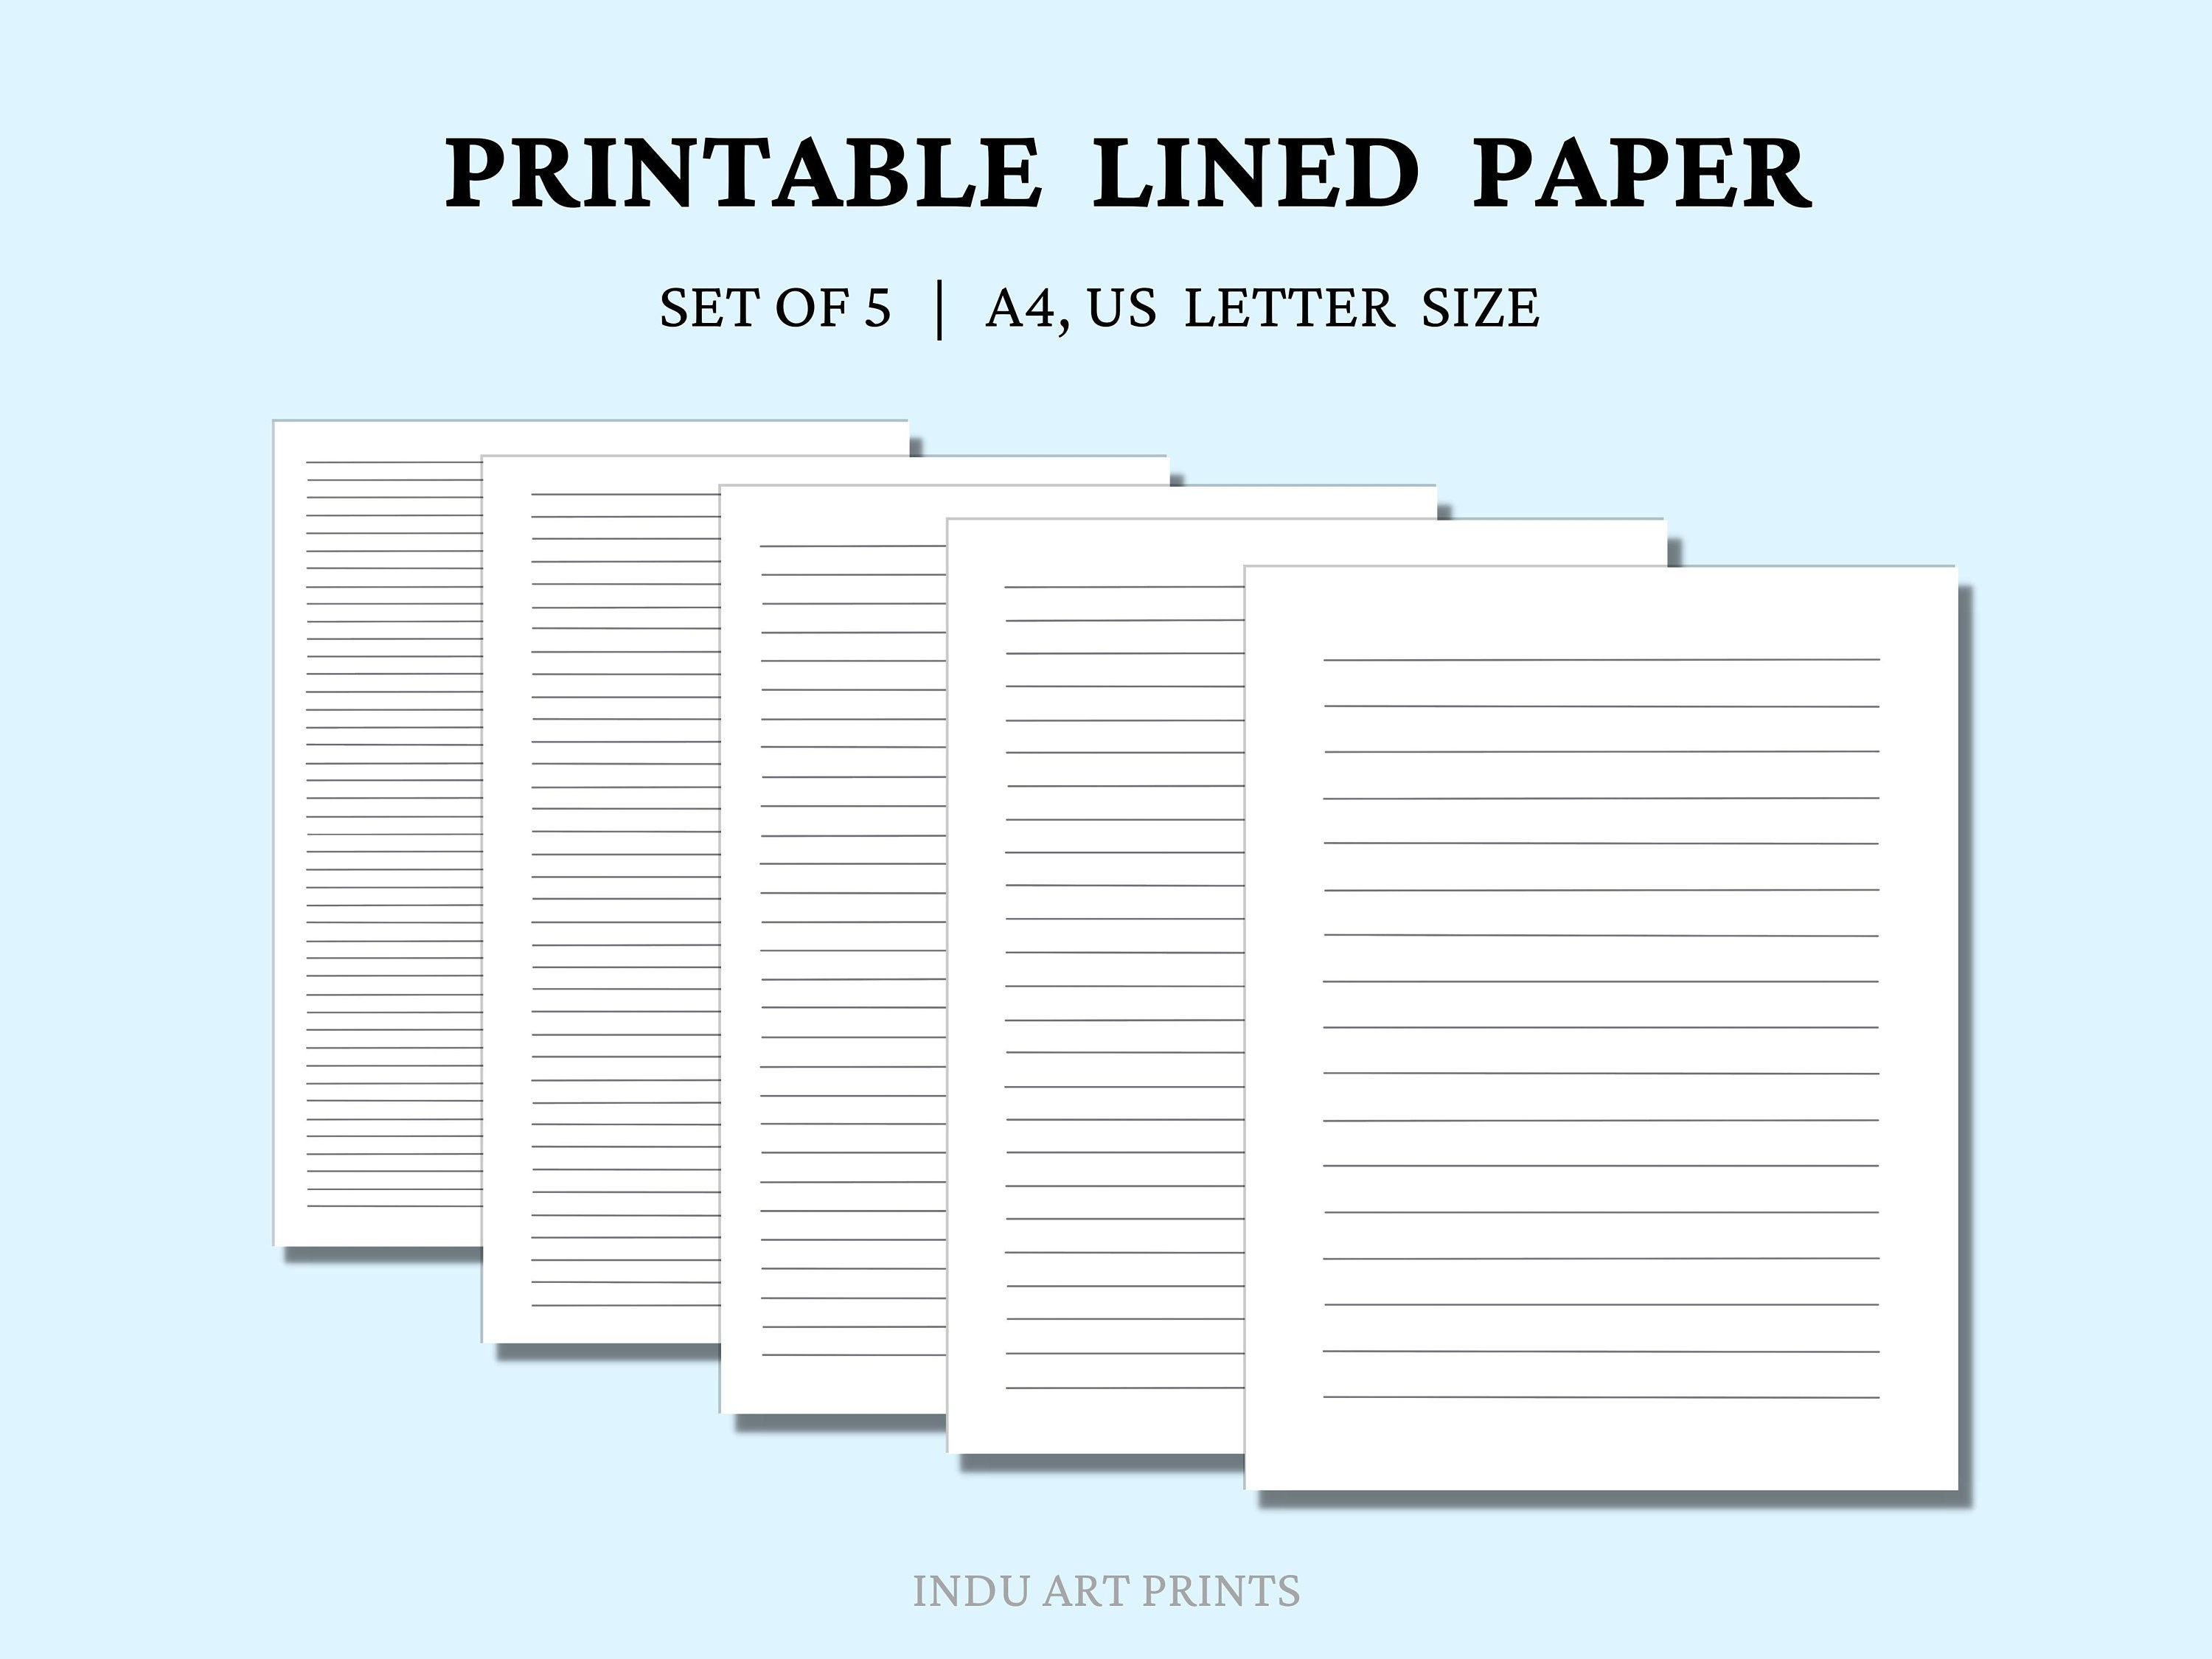 Understanding Types of Lined Paper (Including 5 Lined Paper Printables